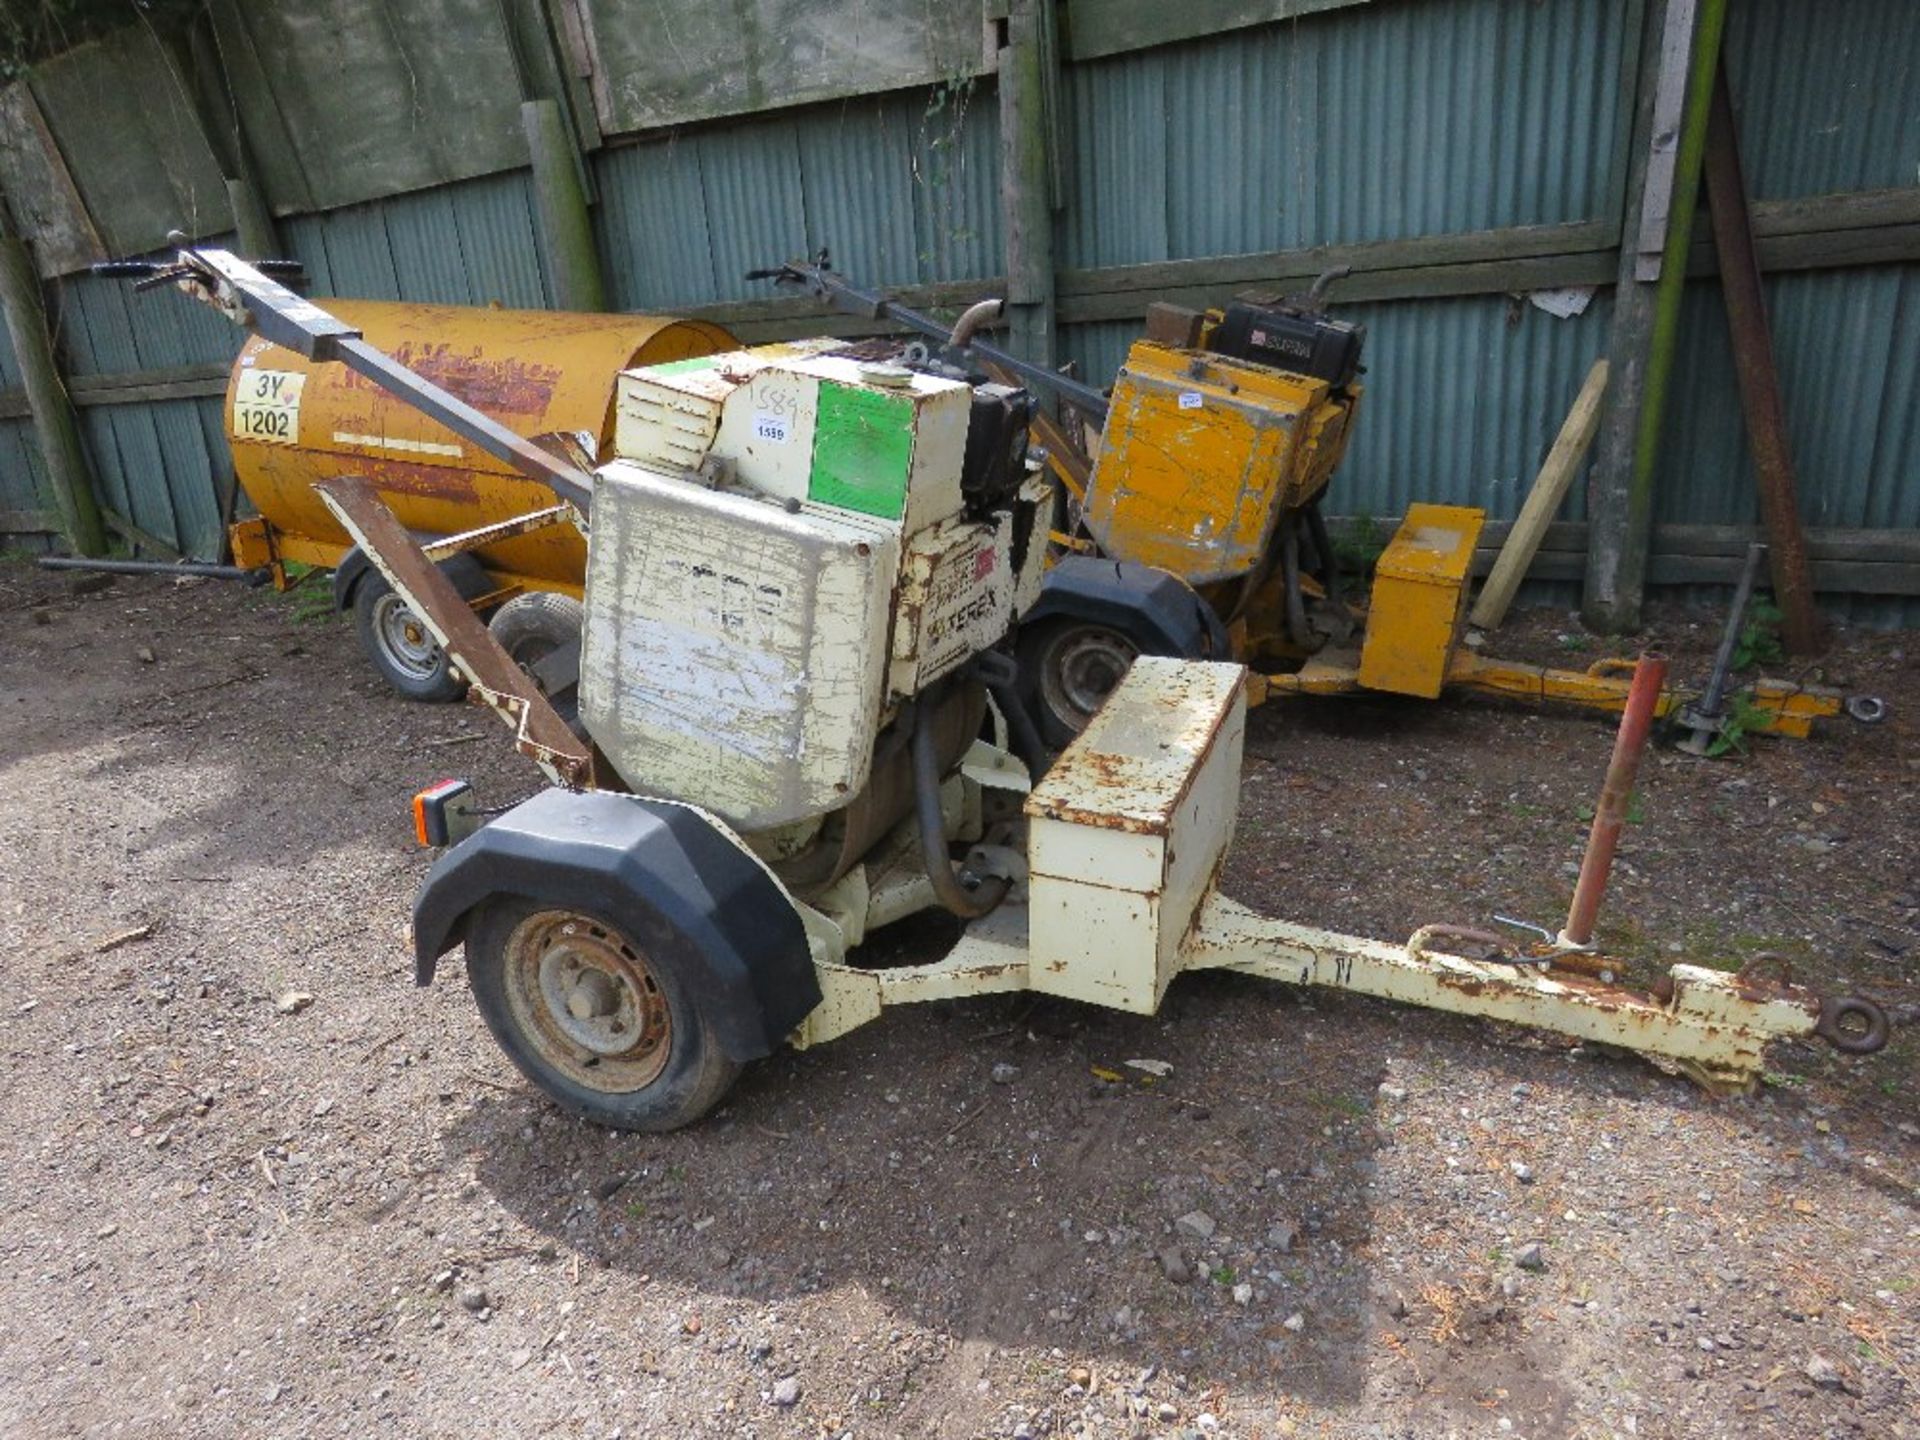 TEREX BENFORD SINGLE DRUM ROLLER ON TRAILER. WHEN TESTED WAS SEEN TO RUN, DRIVE AND VIBRATE...SEE VI